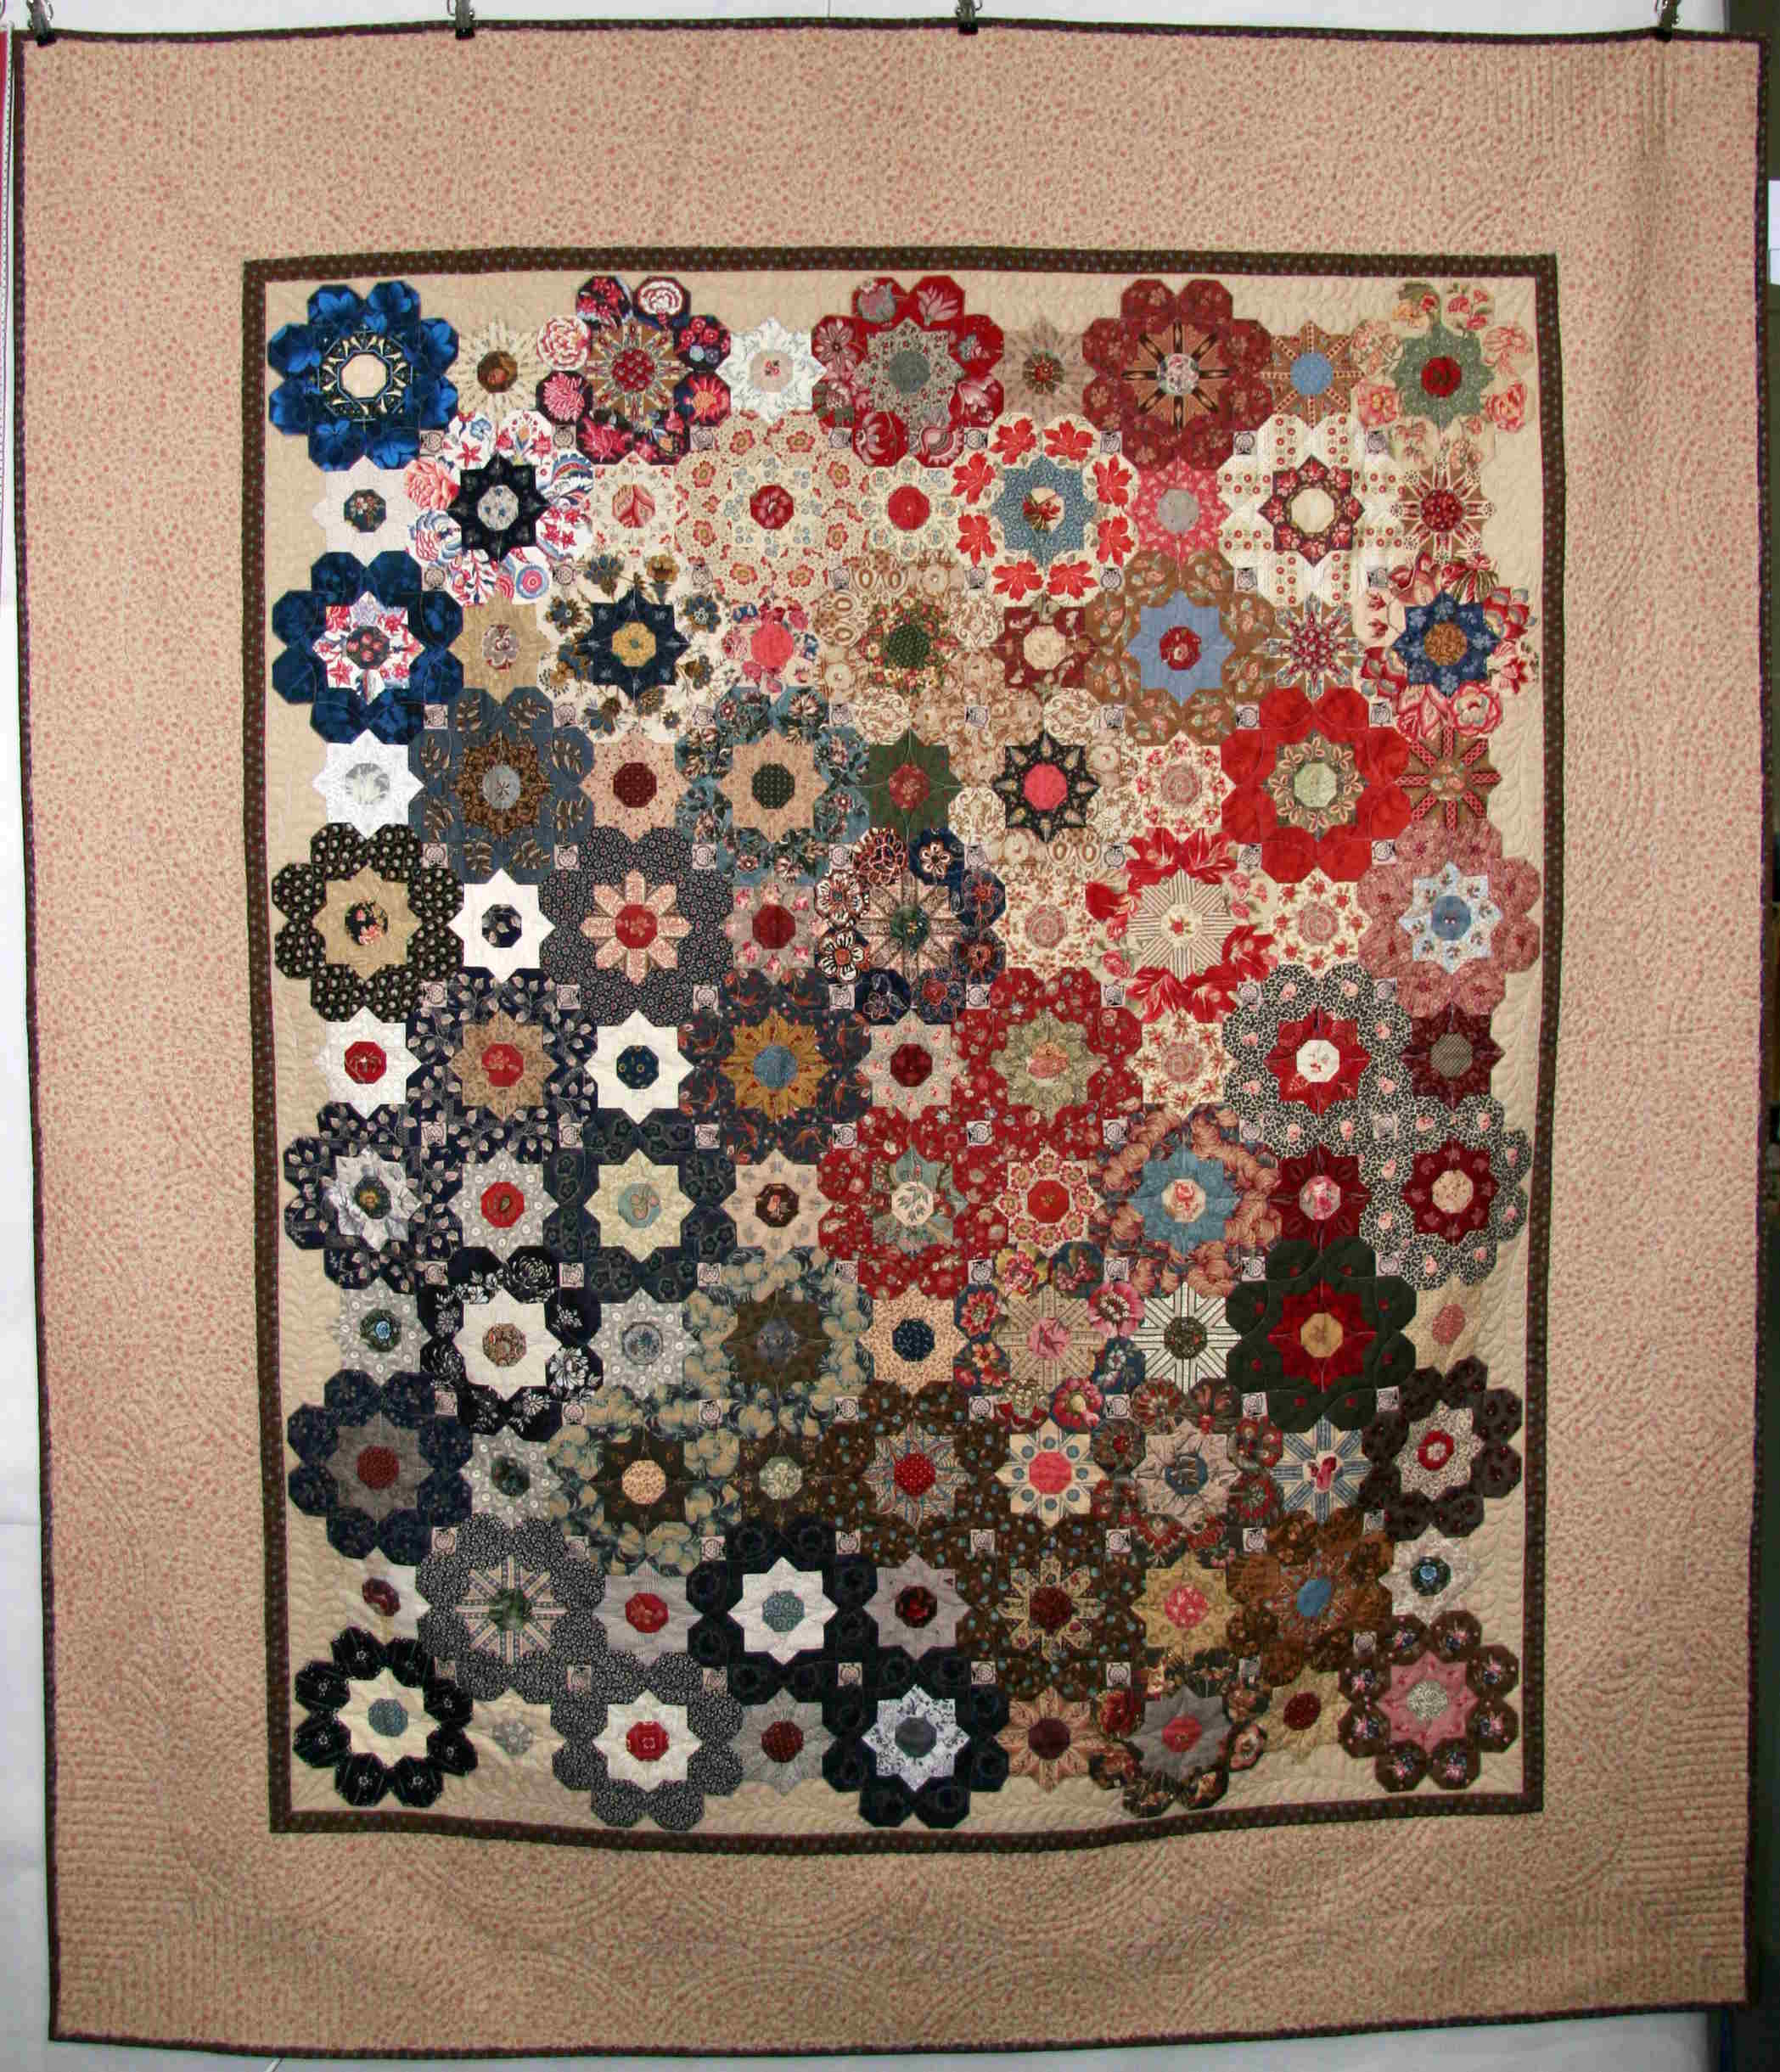 Gloria's Flower, PW Magazin 01-2015, Our Quilting no. 1